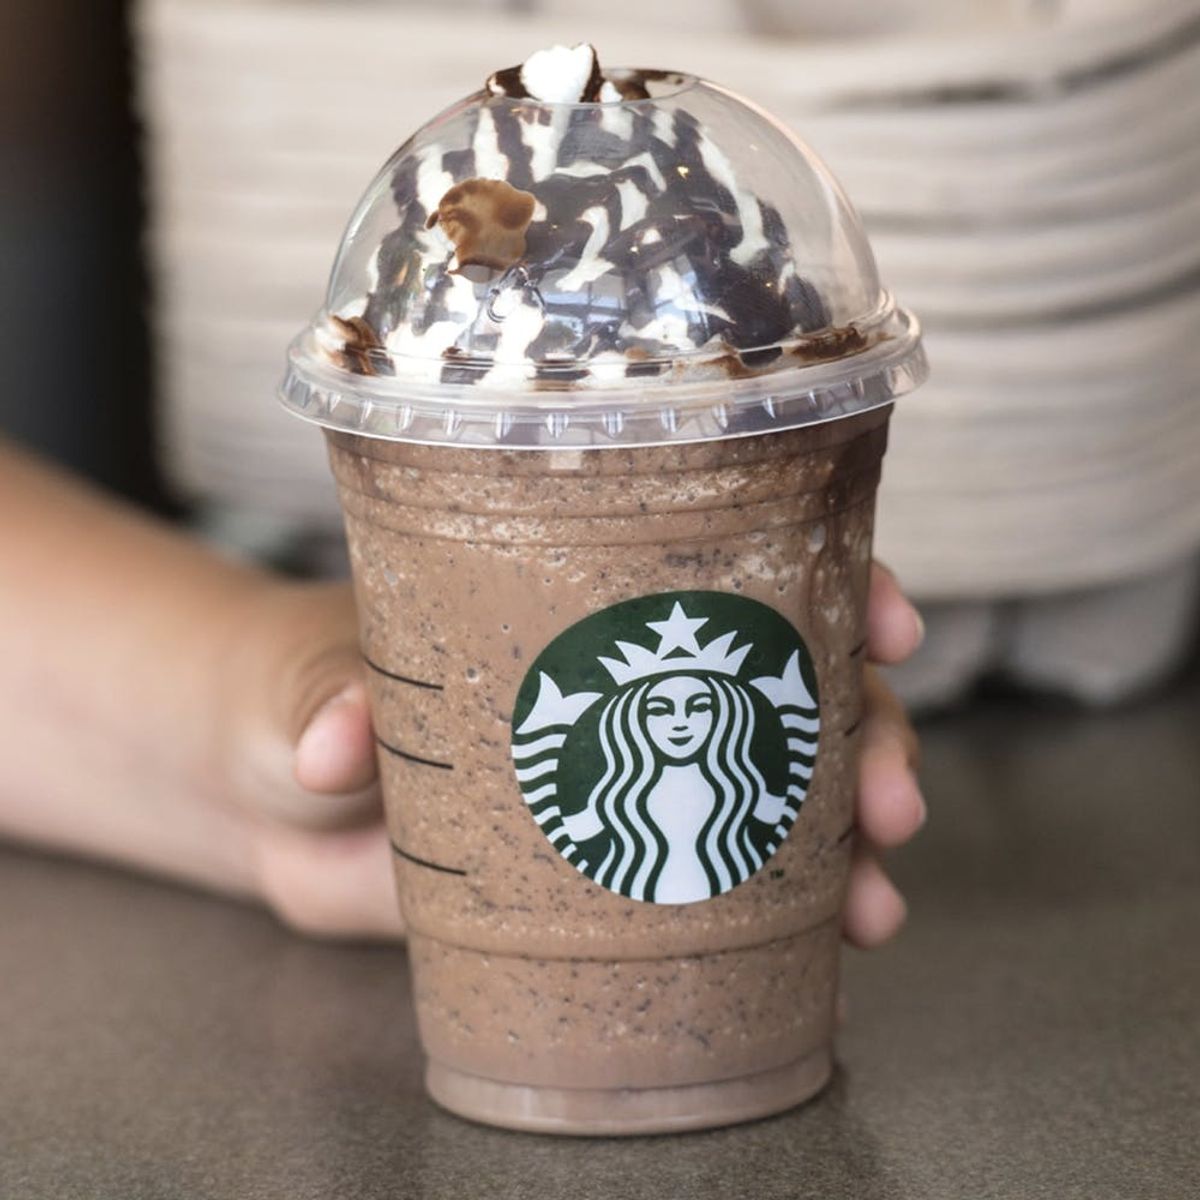 At This Starbucks You Can Get a Drink That’s Basically a Boozy Starbucks Frappuccino